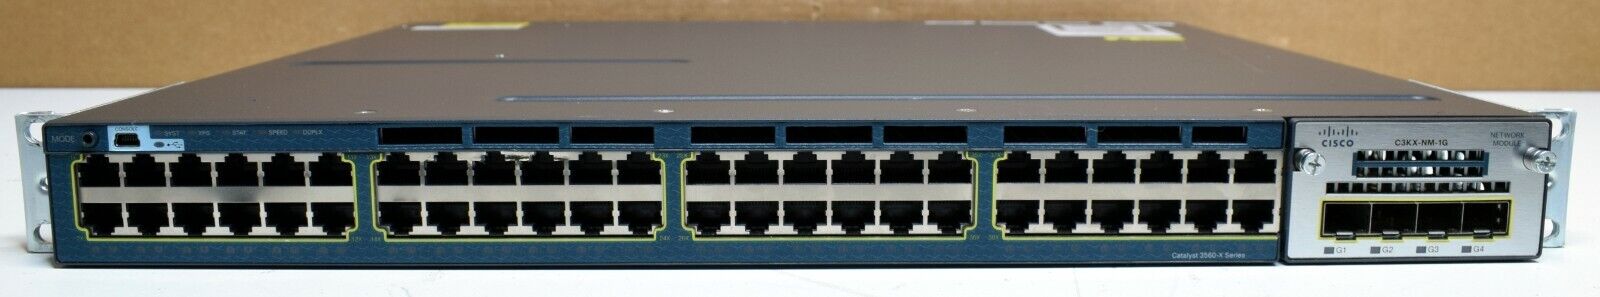 Cisco Catalyst WS-C3560X-48T-L V04 C3KX-NM-1G | 48 Port Gigabit Ethernet Switch 